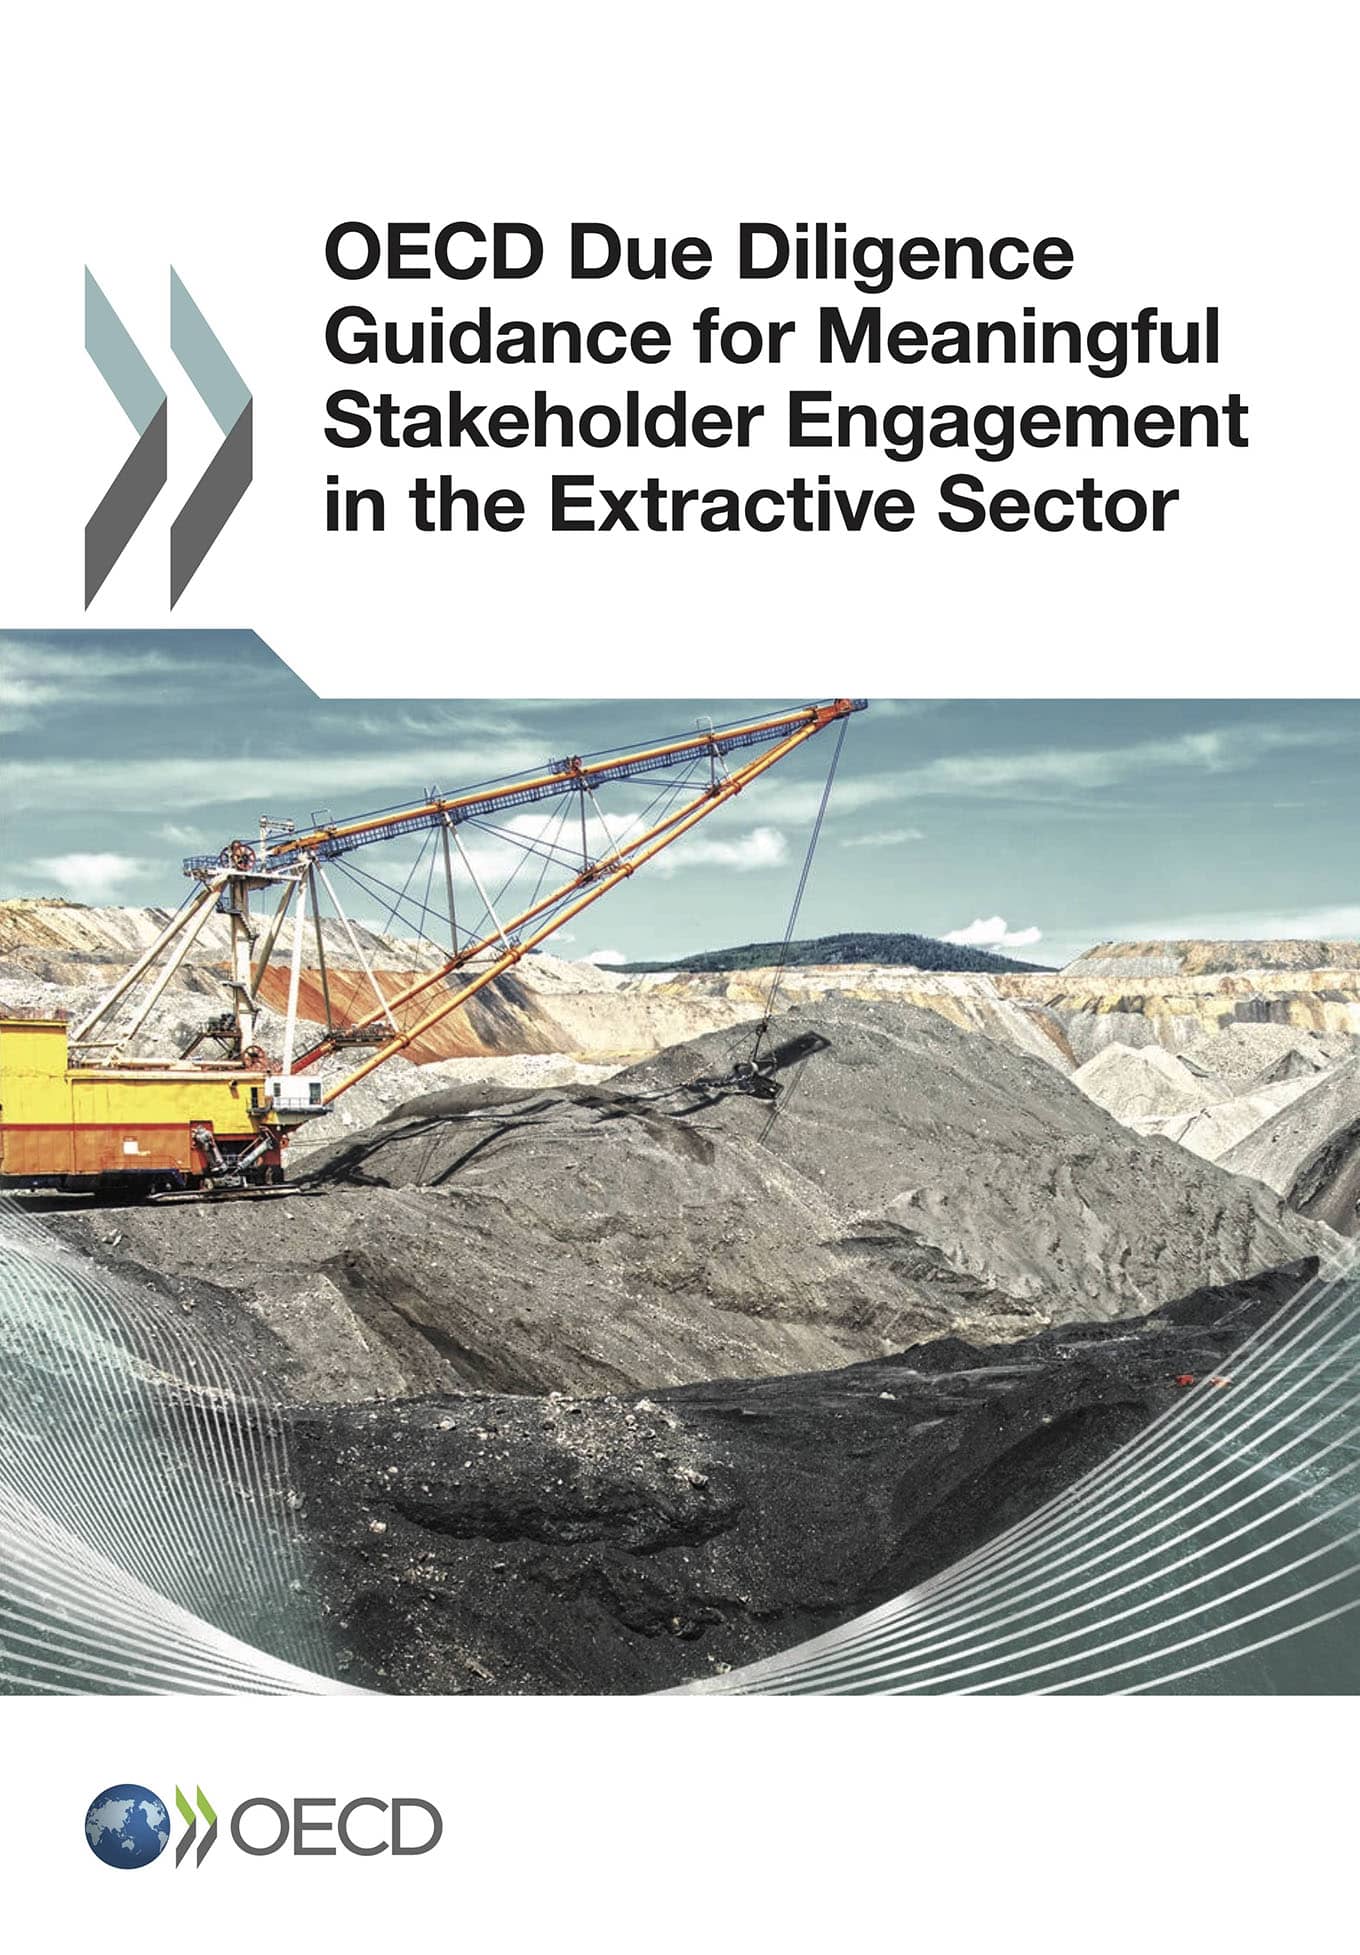 Due Diligence Guidance for Meaningful Stakeholder Engagement in the Extractive Sector (OECD, 2017)